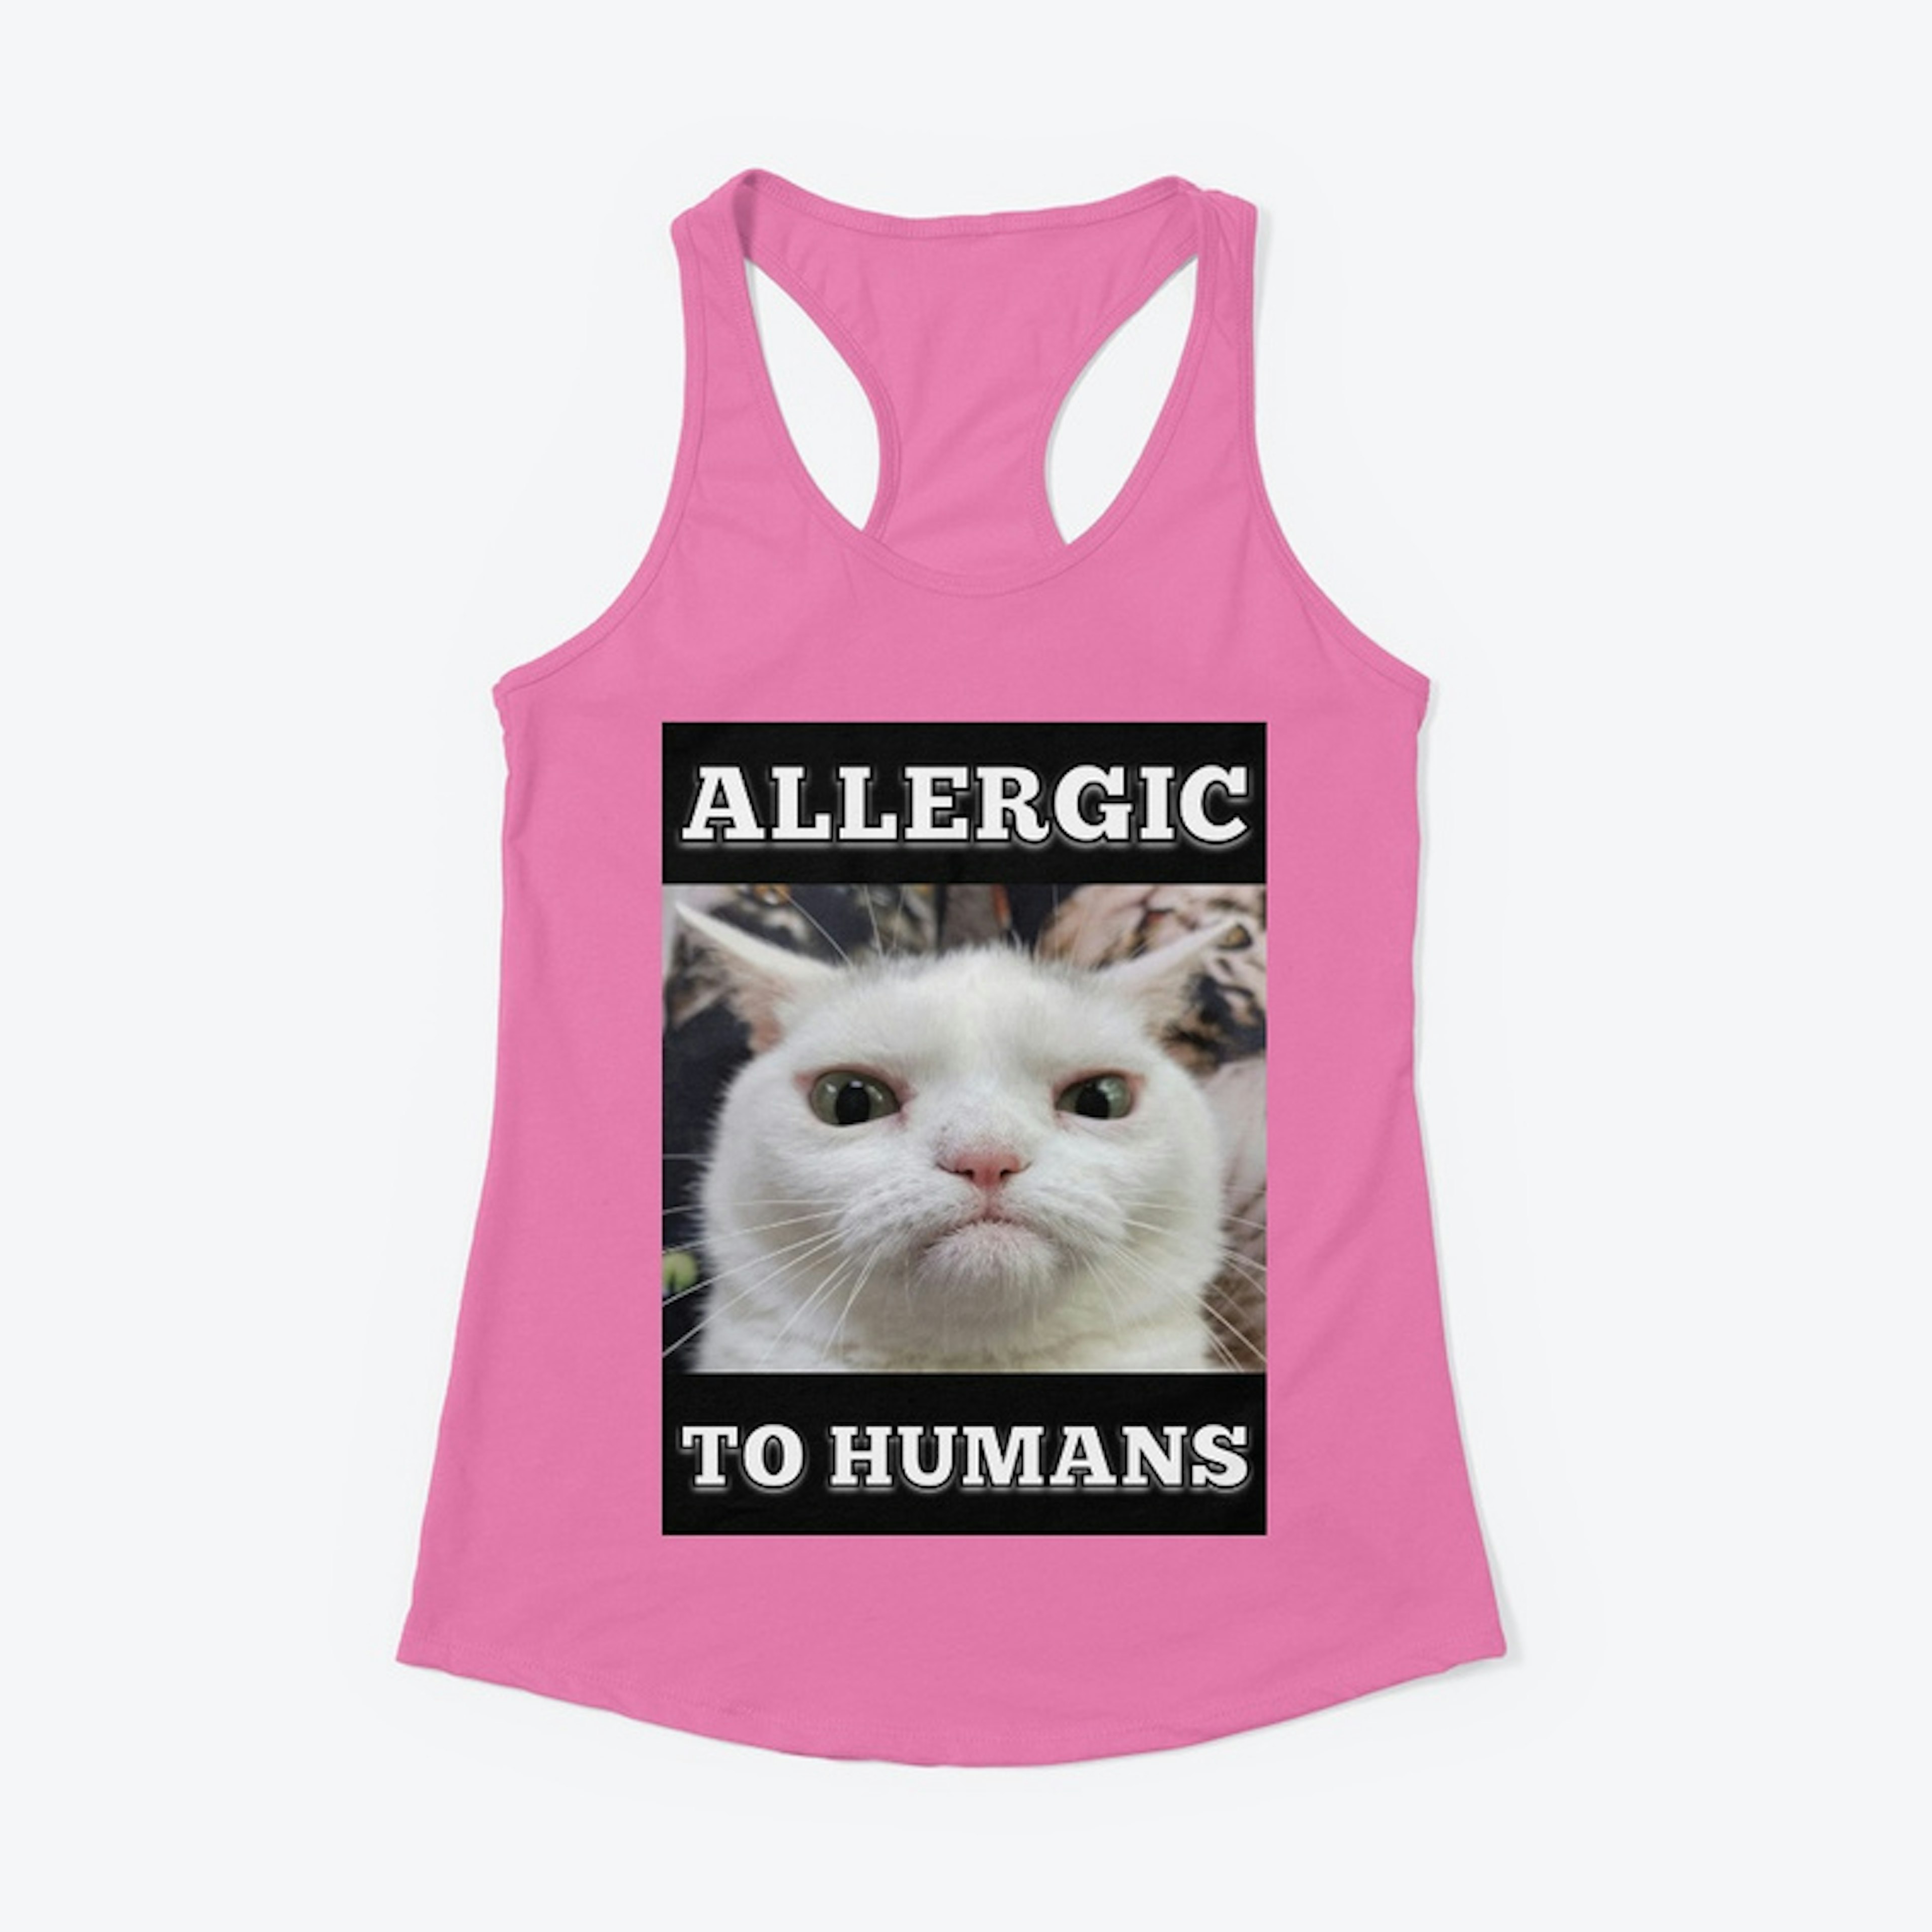 Allergic to Humans Racerback Tank